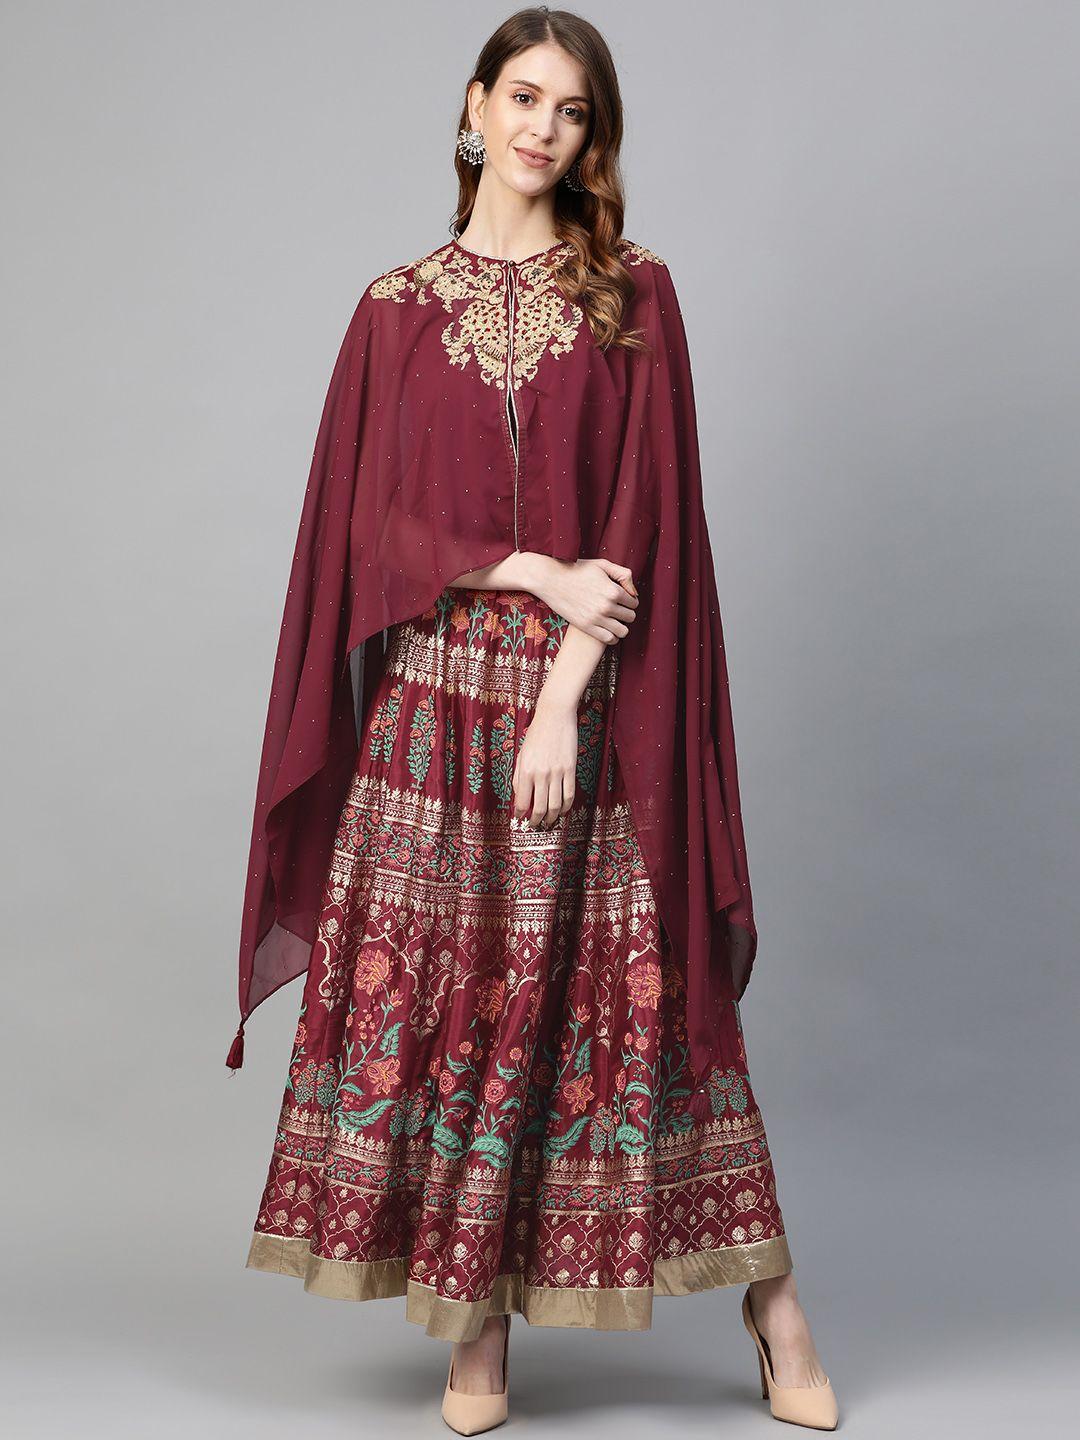 wishful-by-w-women-maroon-&-golden-embroidered-top-with-skirt